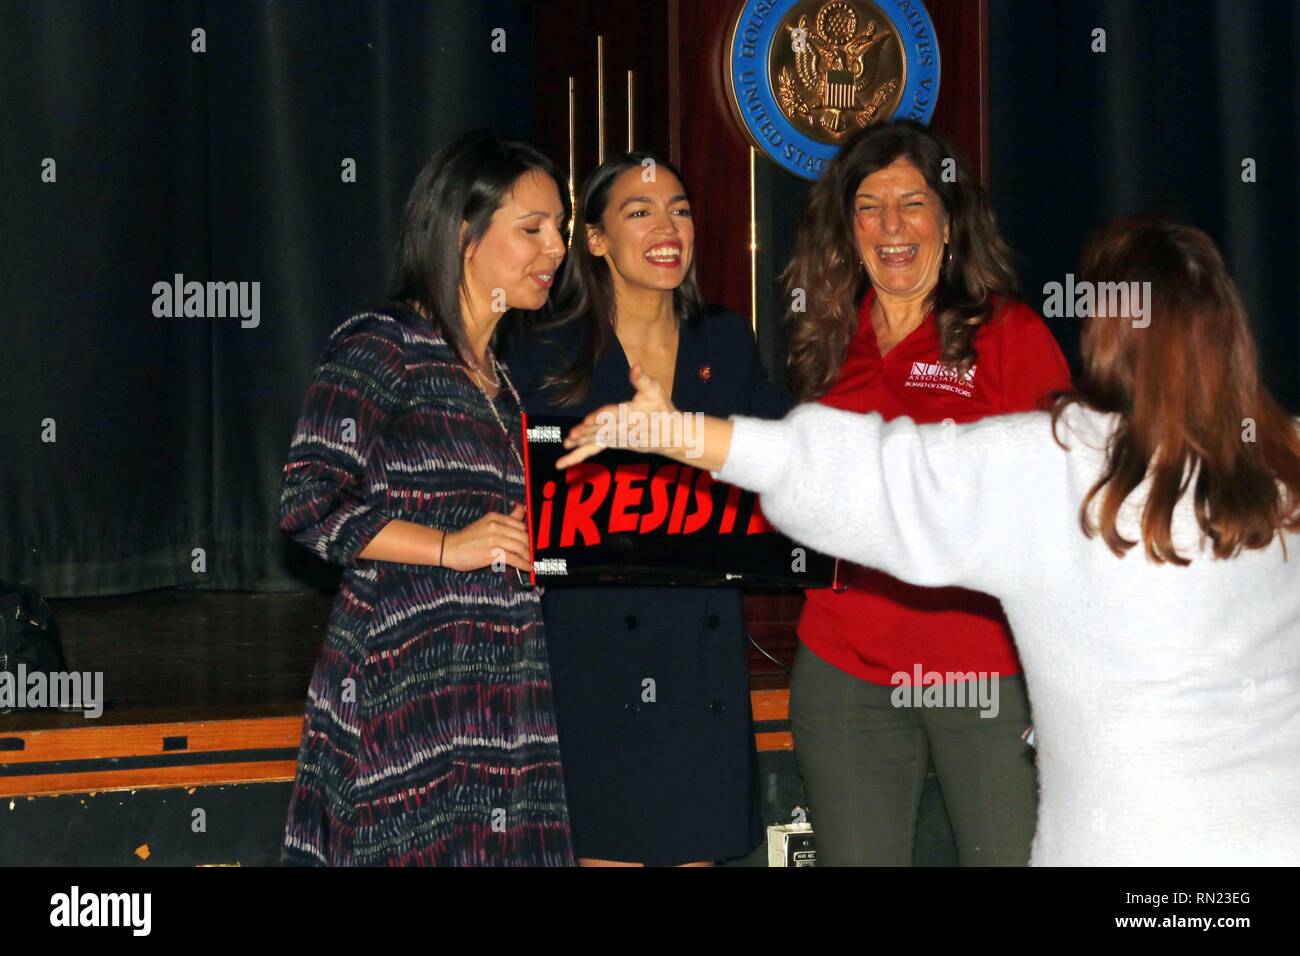 New York, NY, USA.  16th Feb, 2019. Freshman U.S. Congresswoman Alexandria Ocasio-Cortez (D-NY) has delivered her inaugural address in her Bronx home district on 15 February 2019. The address was delayed because of the recent partial government shutdown. The ceremony featured a ceremonial swearing-in, an address to her constituents and featured speeches by local political leaders and massive display of support from her supporters. © 2019 G. Ronald Lopez/DigiPixsAgain.us/Alamy Live News Stock Photo